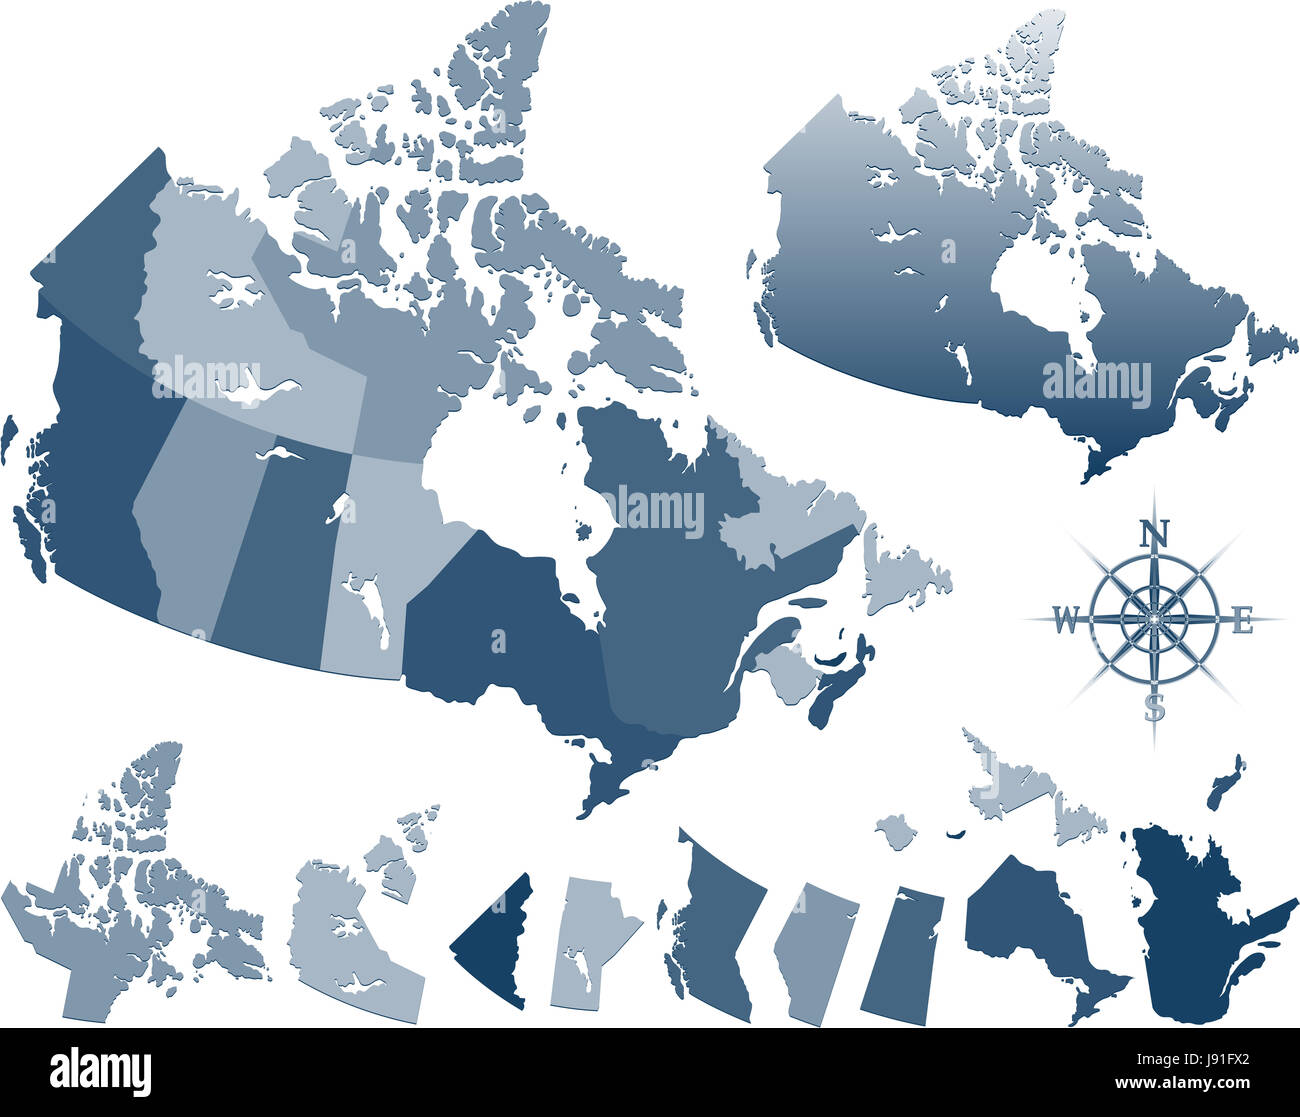 graphic, new, illustration, canada, outline, national, countries, island, Stock Photo